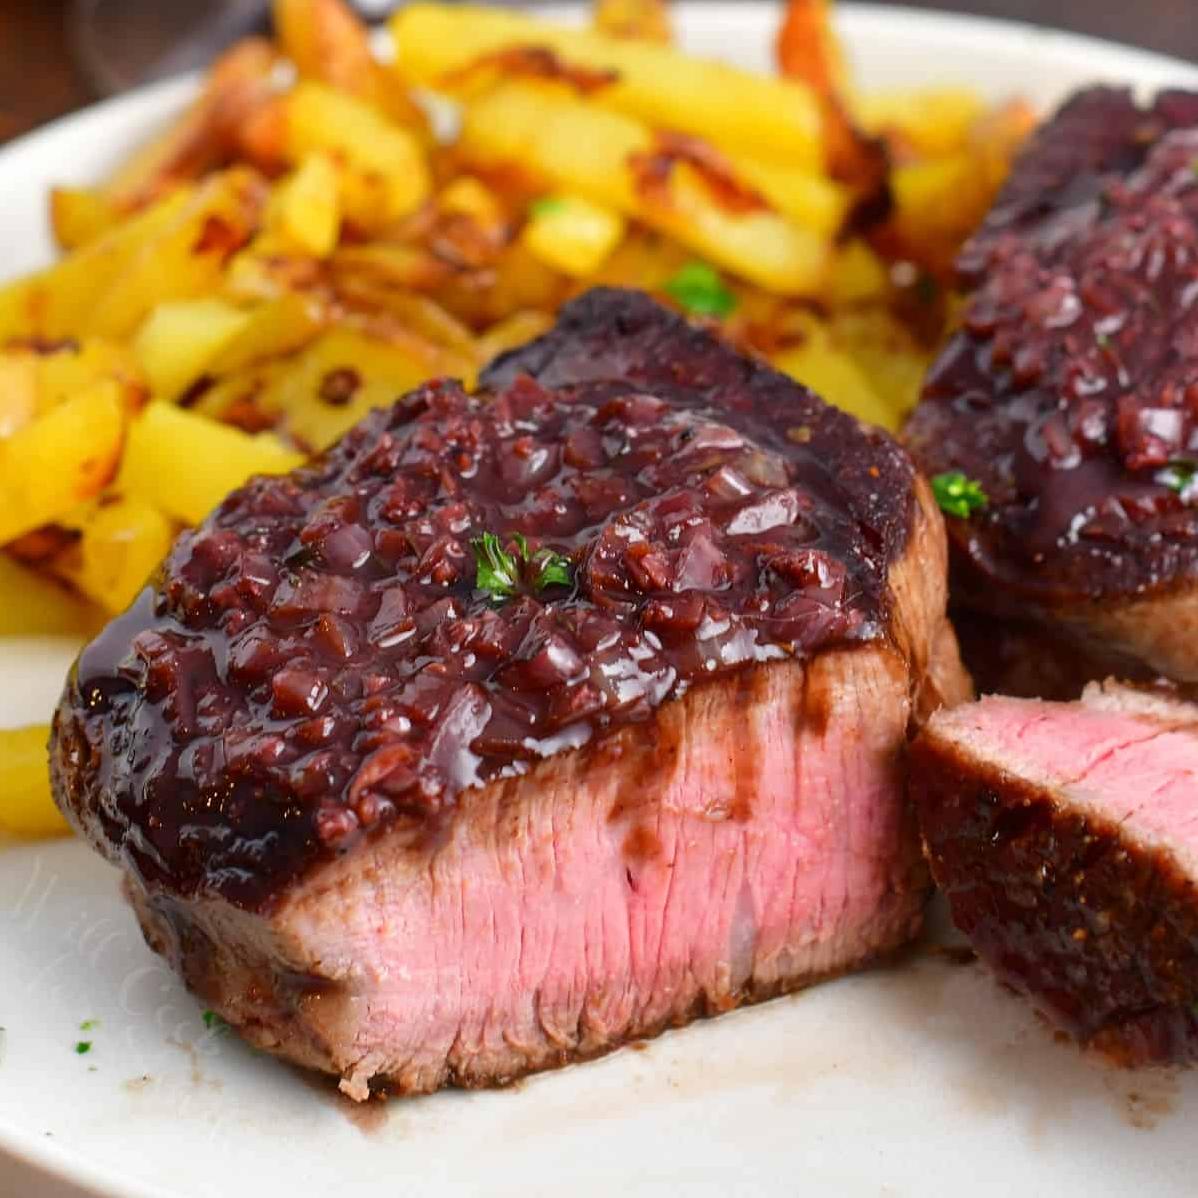  Sizzling steaks drenched in a delicious red wine reduction.